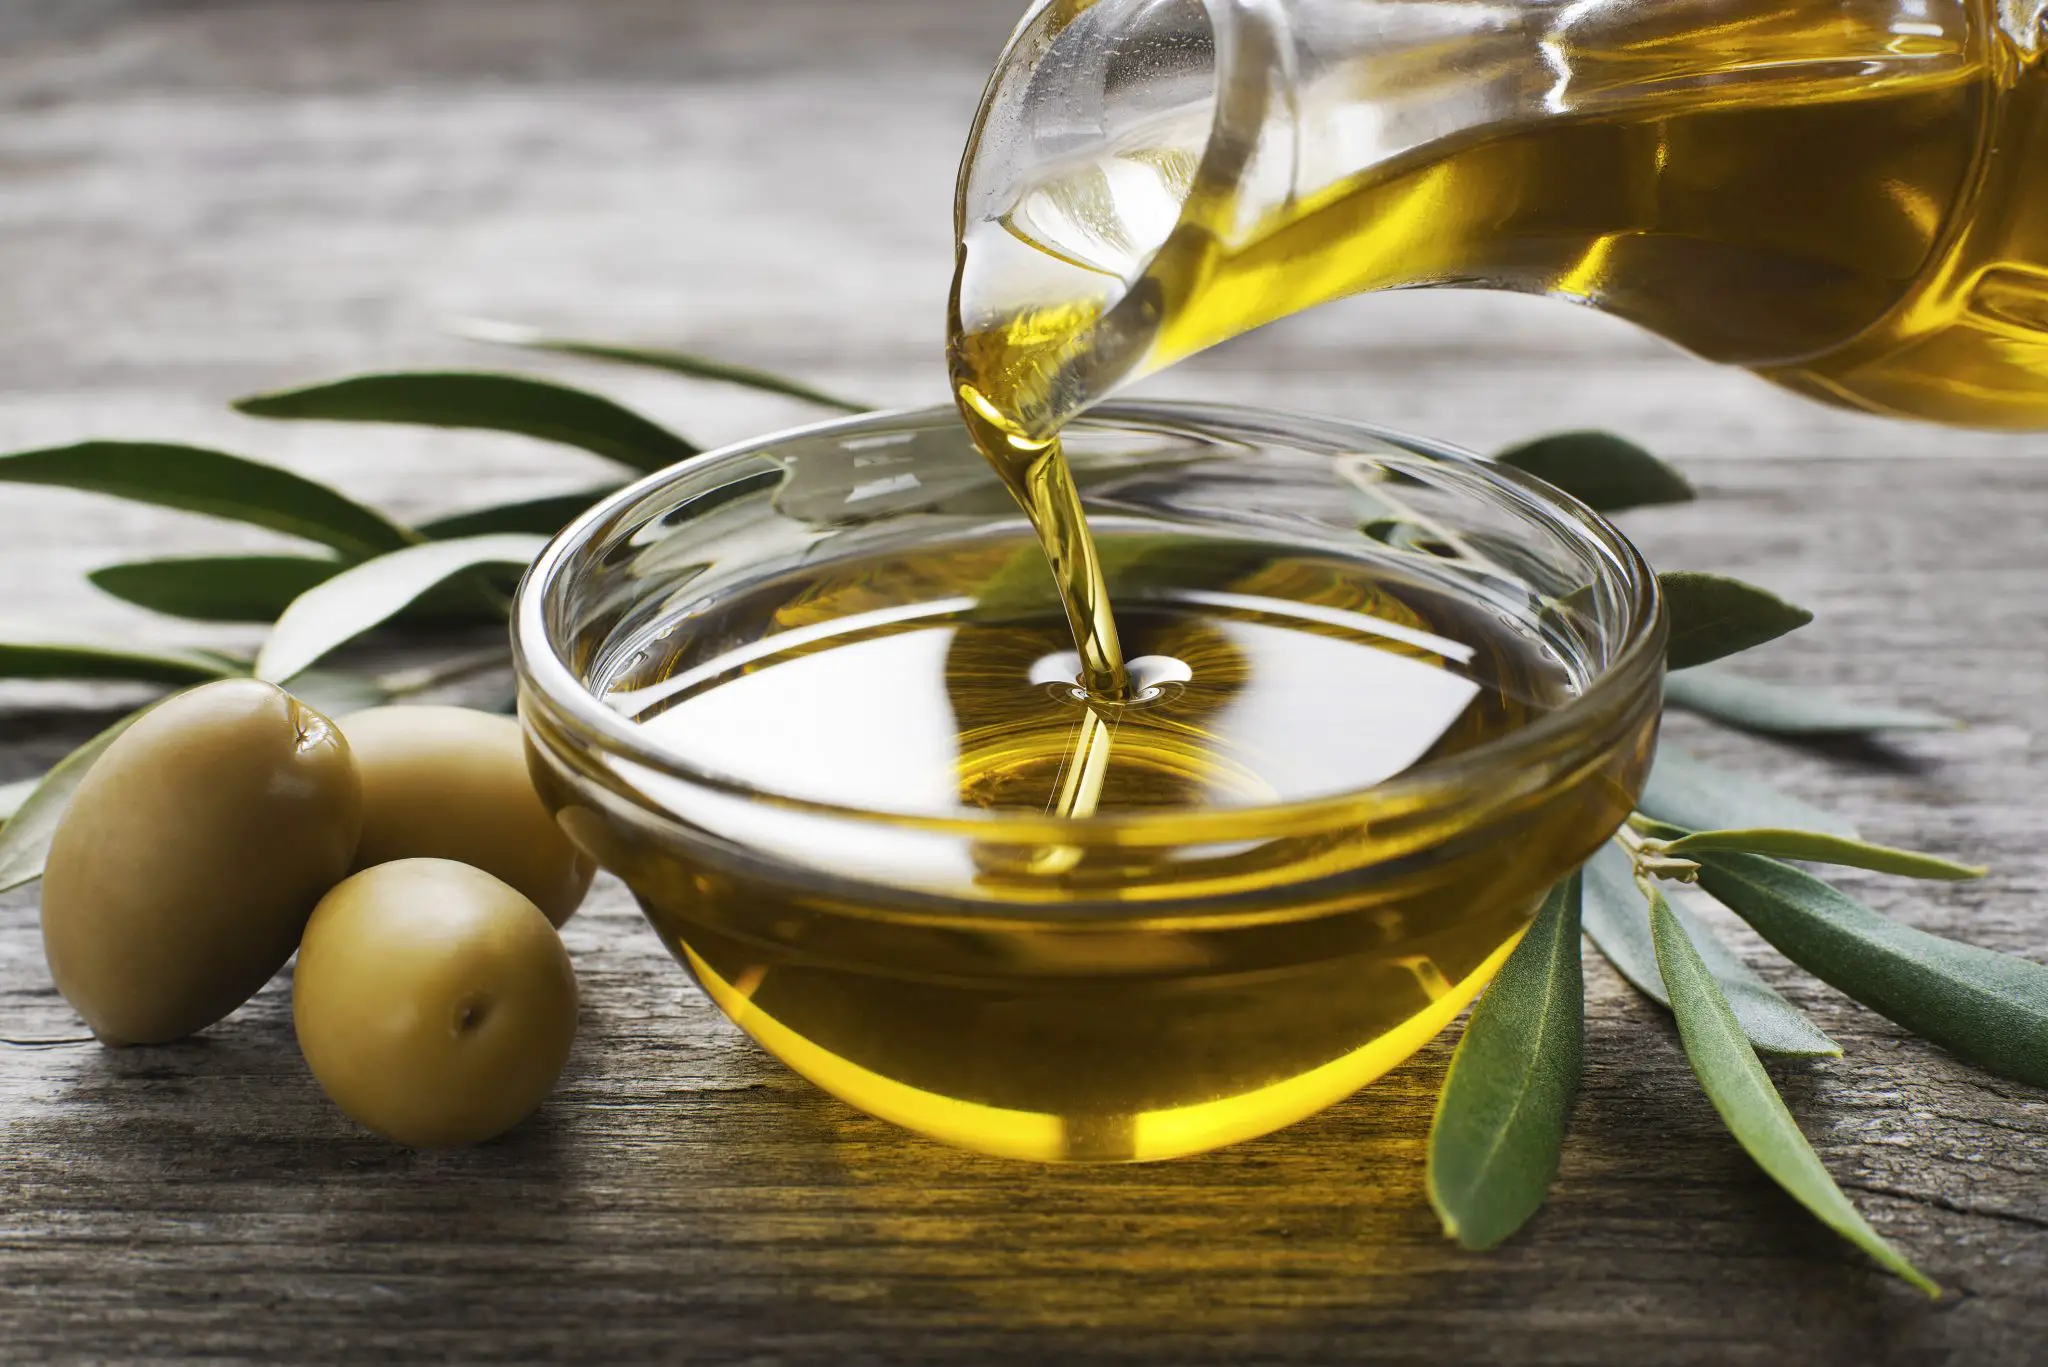 Can we use expired olive oil for skin? How long does unopened olive oil last?